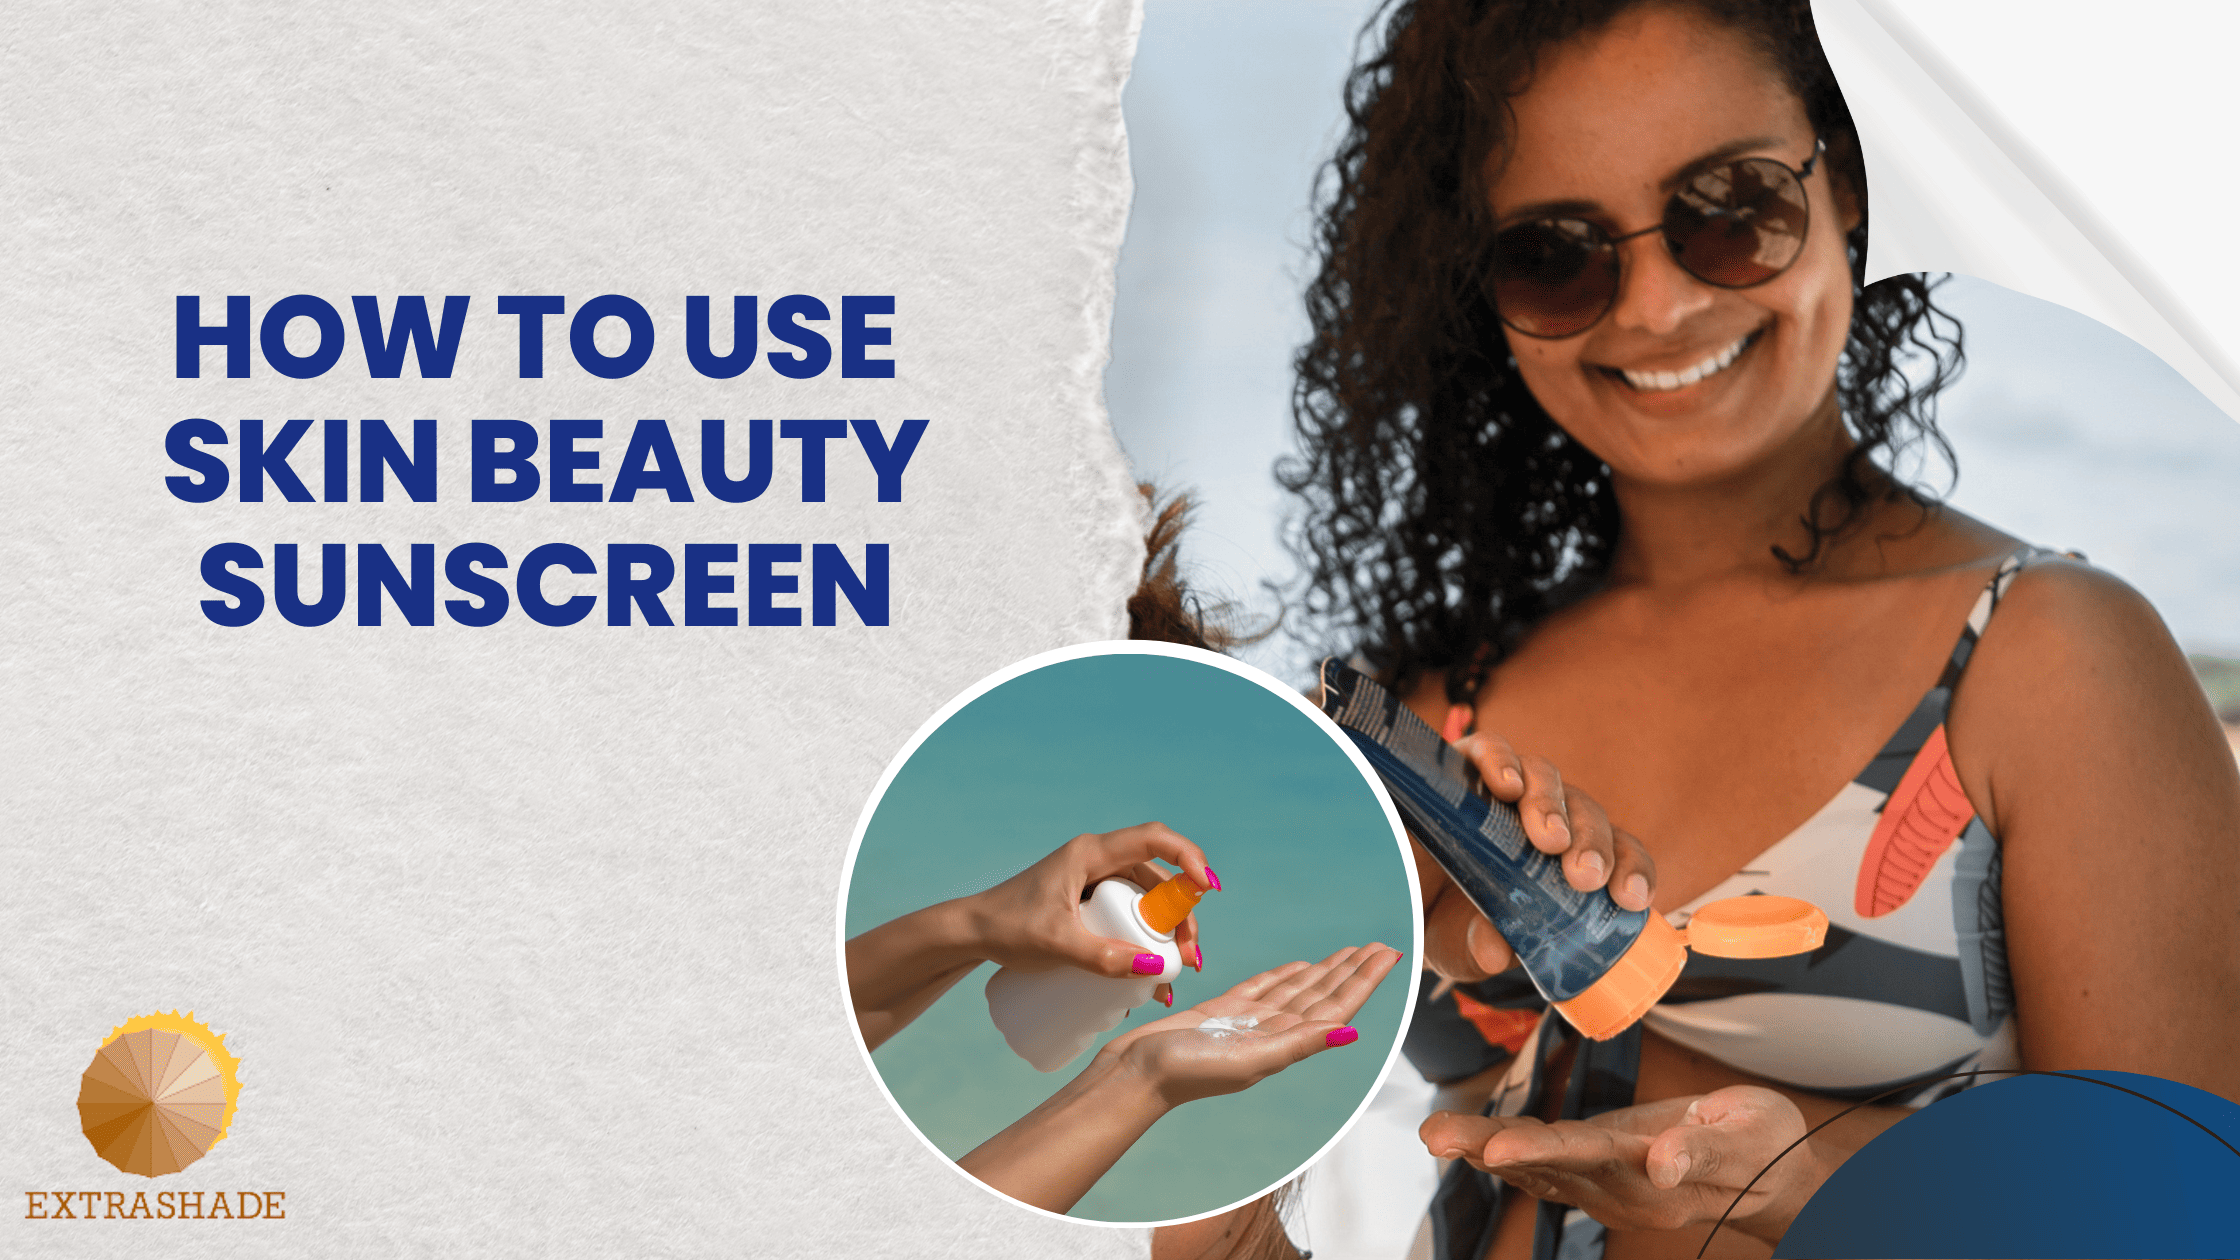 How to properly use skin beauty sunscreen